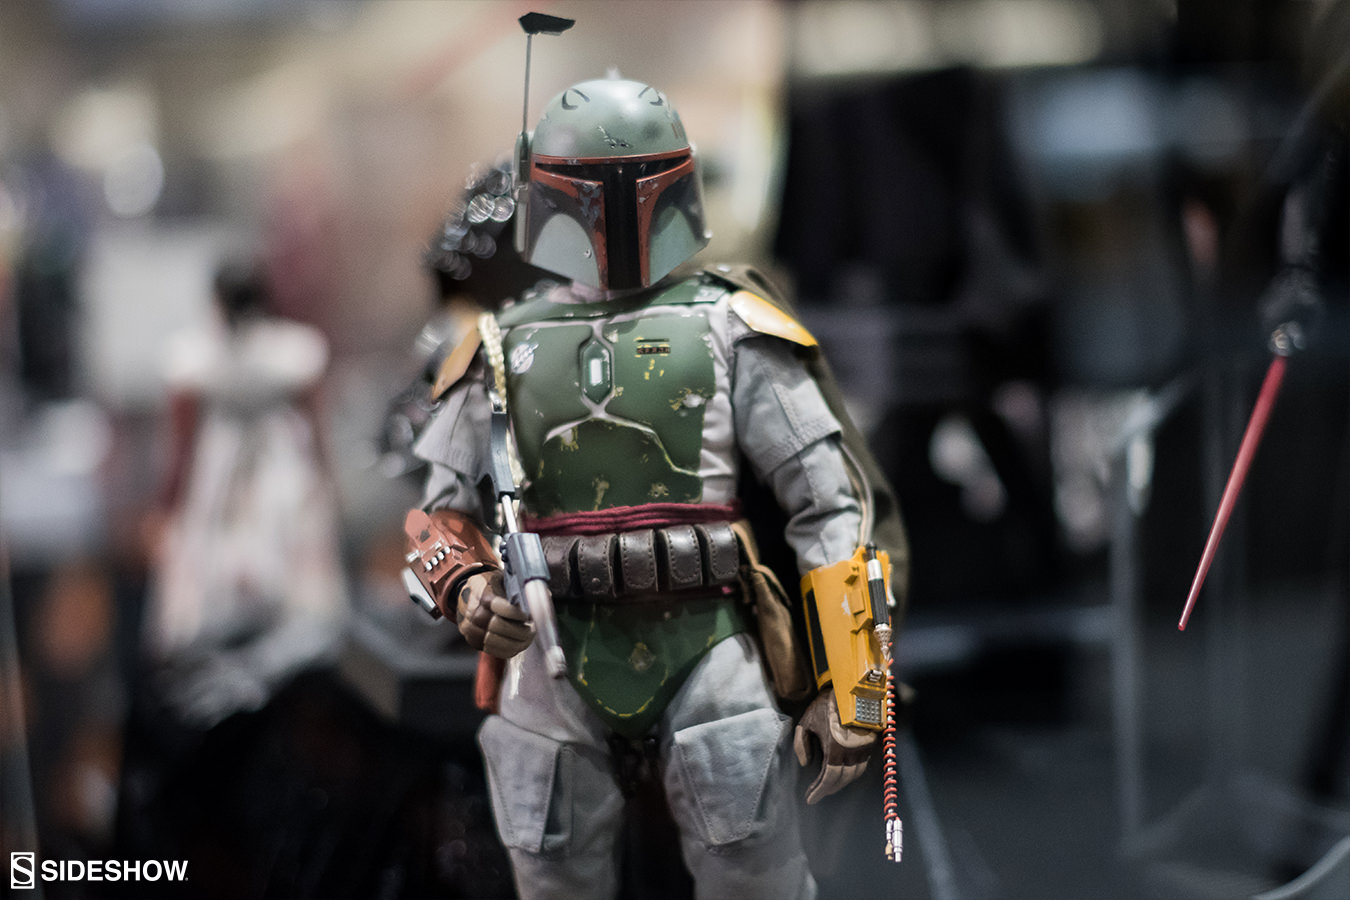 Hot Toys Star Wars SDCC 2018 Sixth Scale Figure